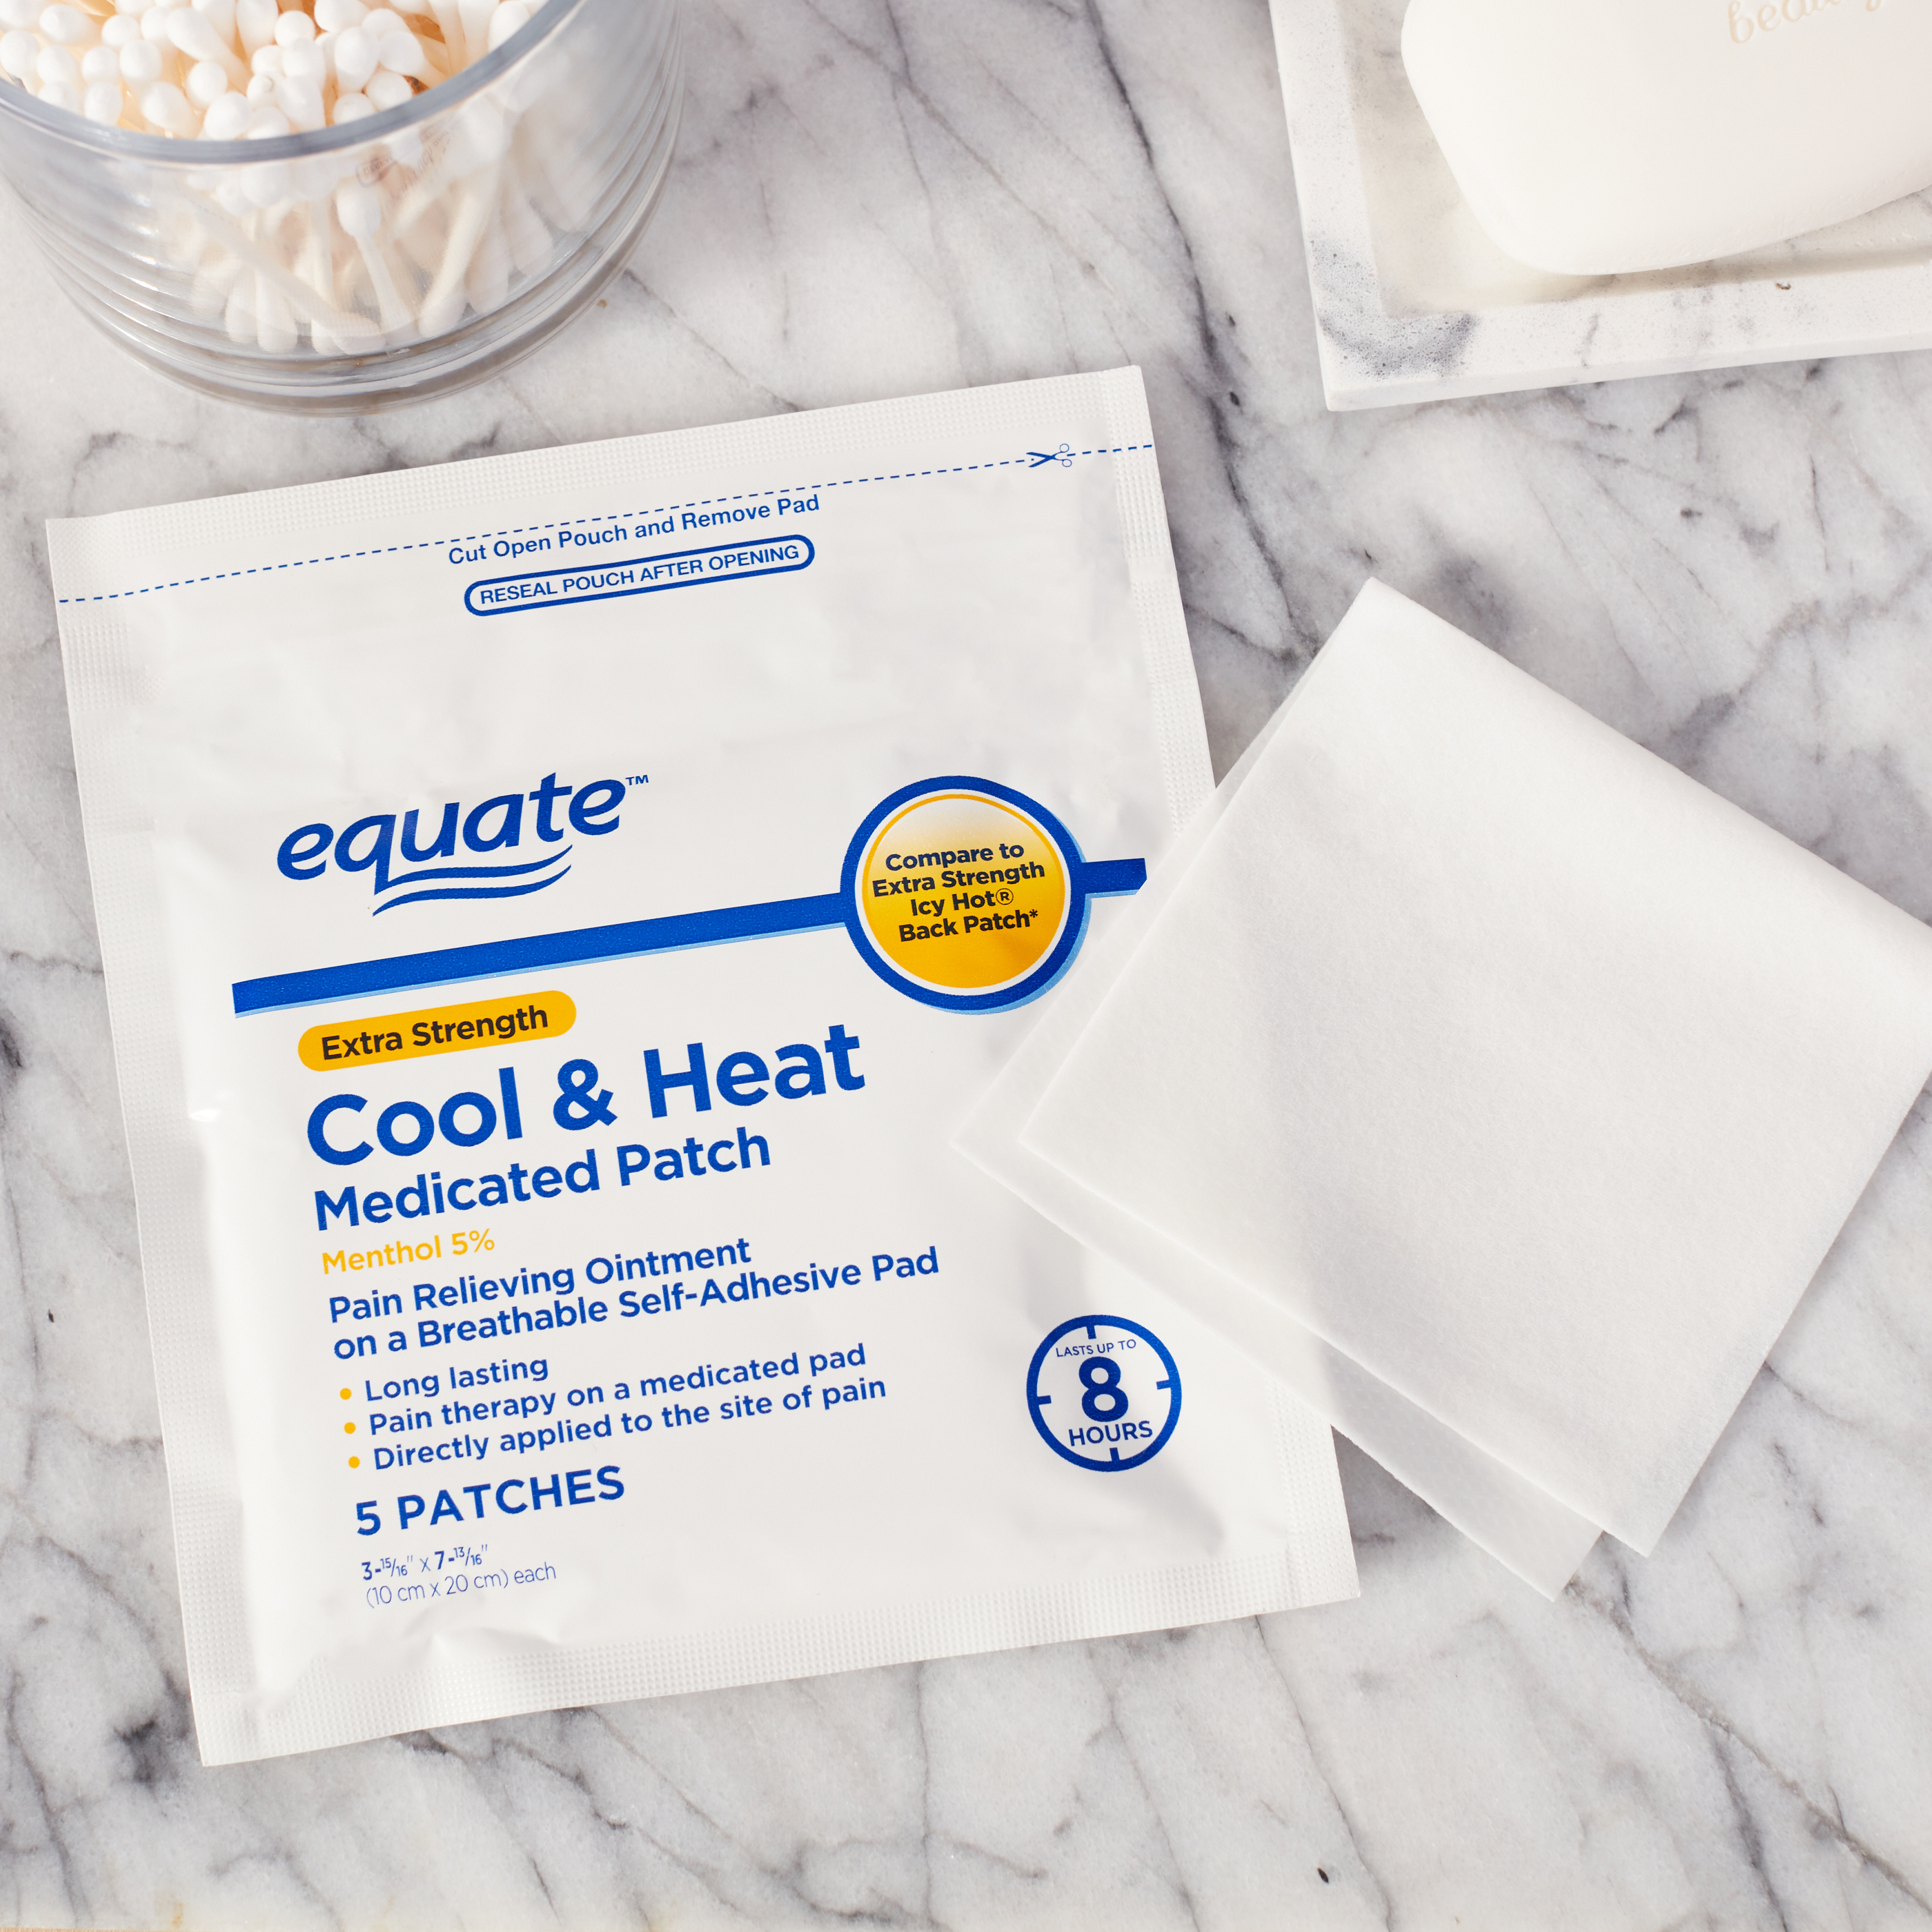 Equate Extra Strength Cool & Heat Medicated Patches, 5 Count - image 2 of 10